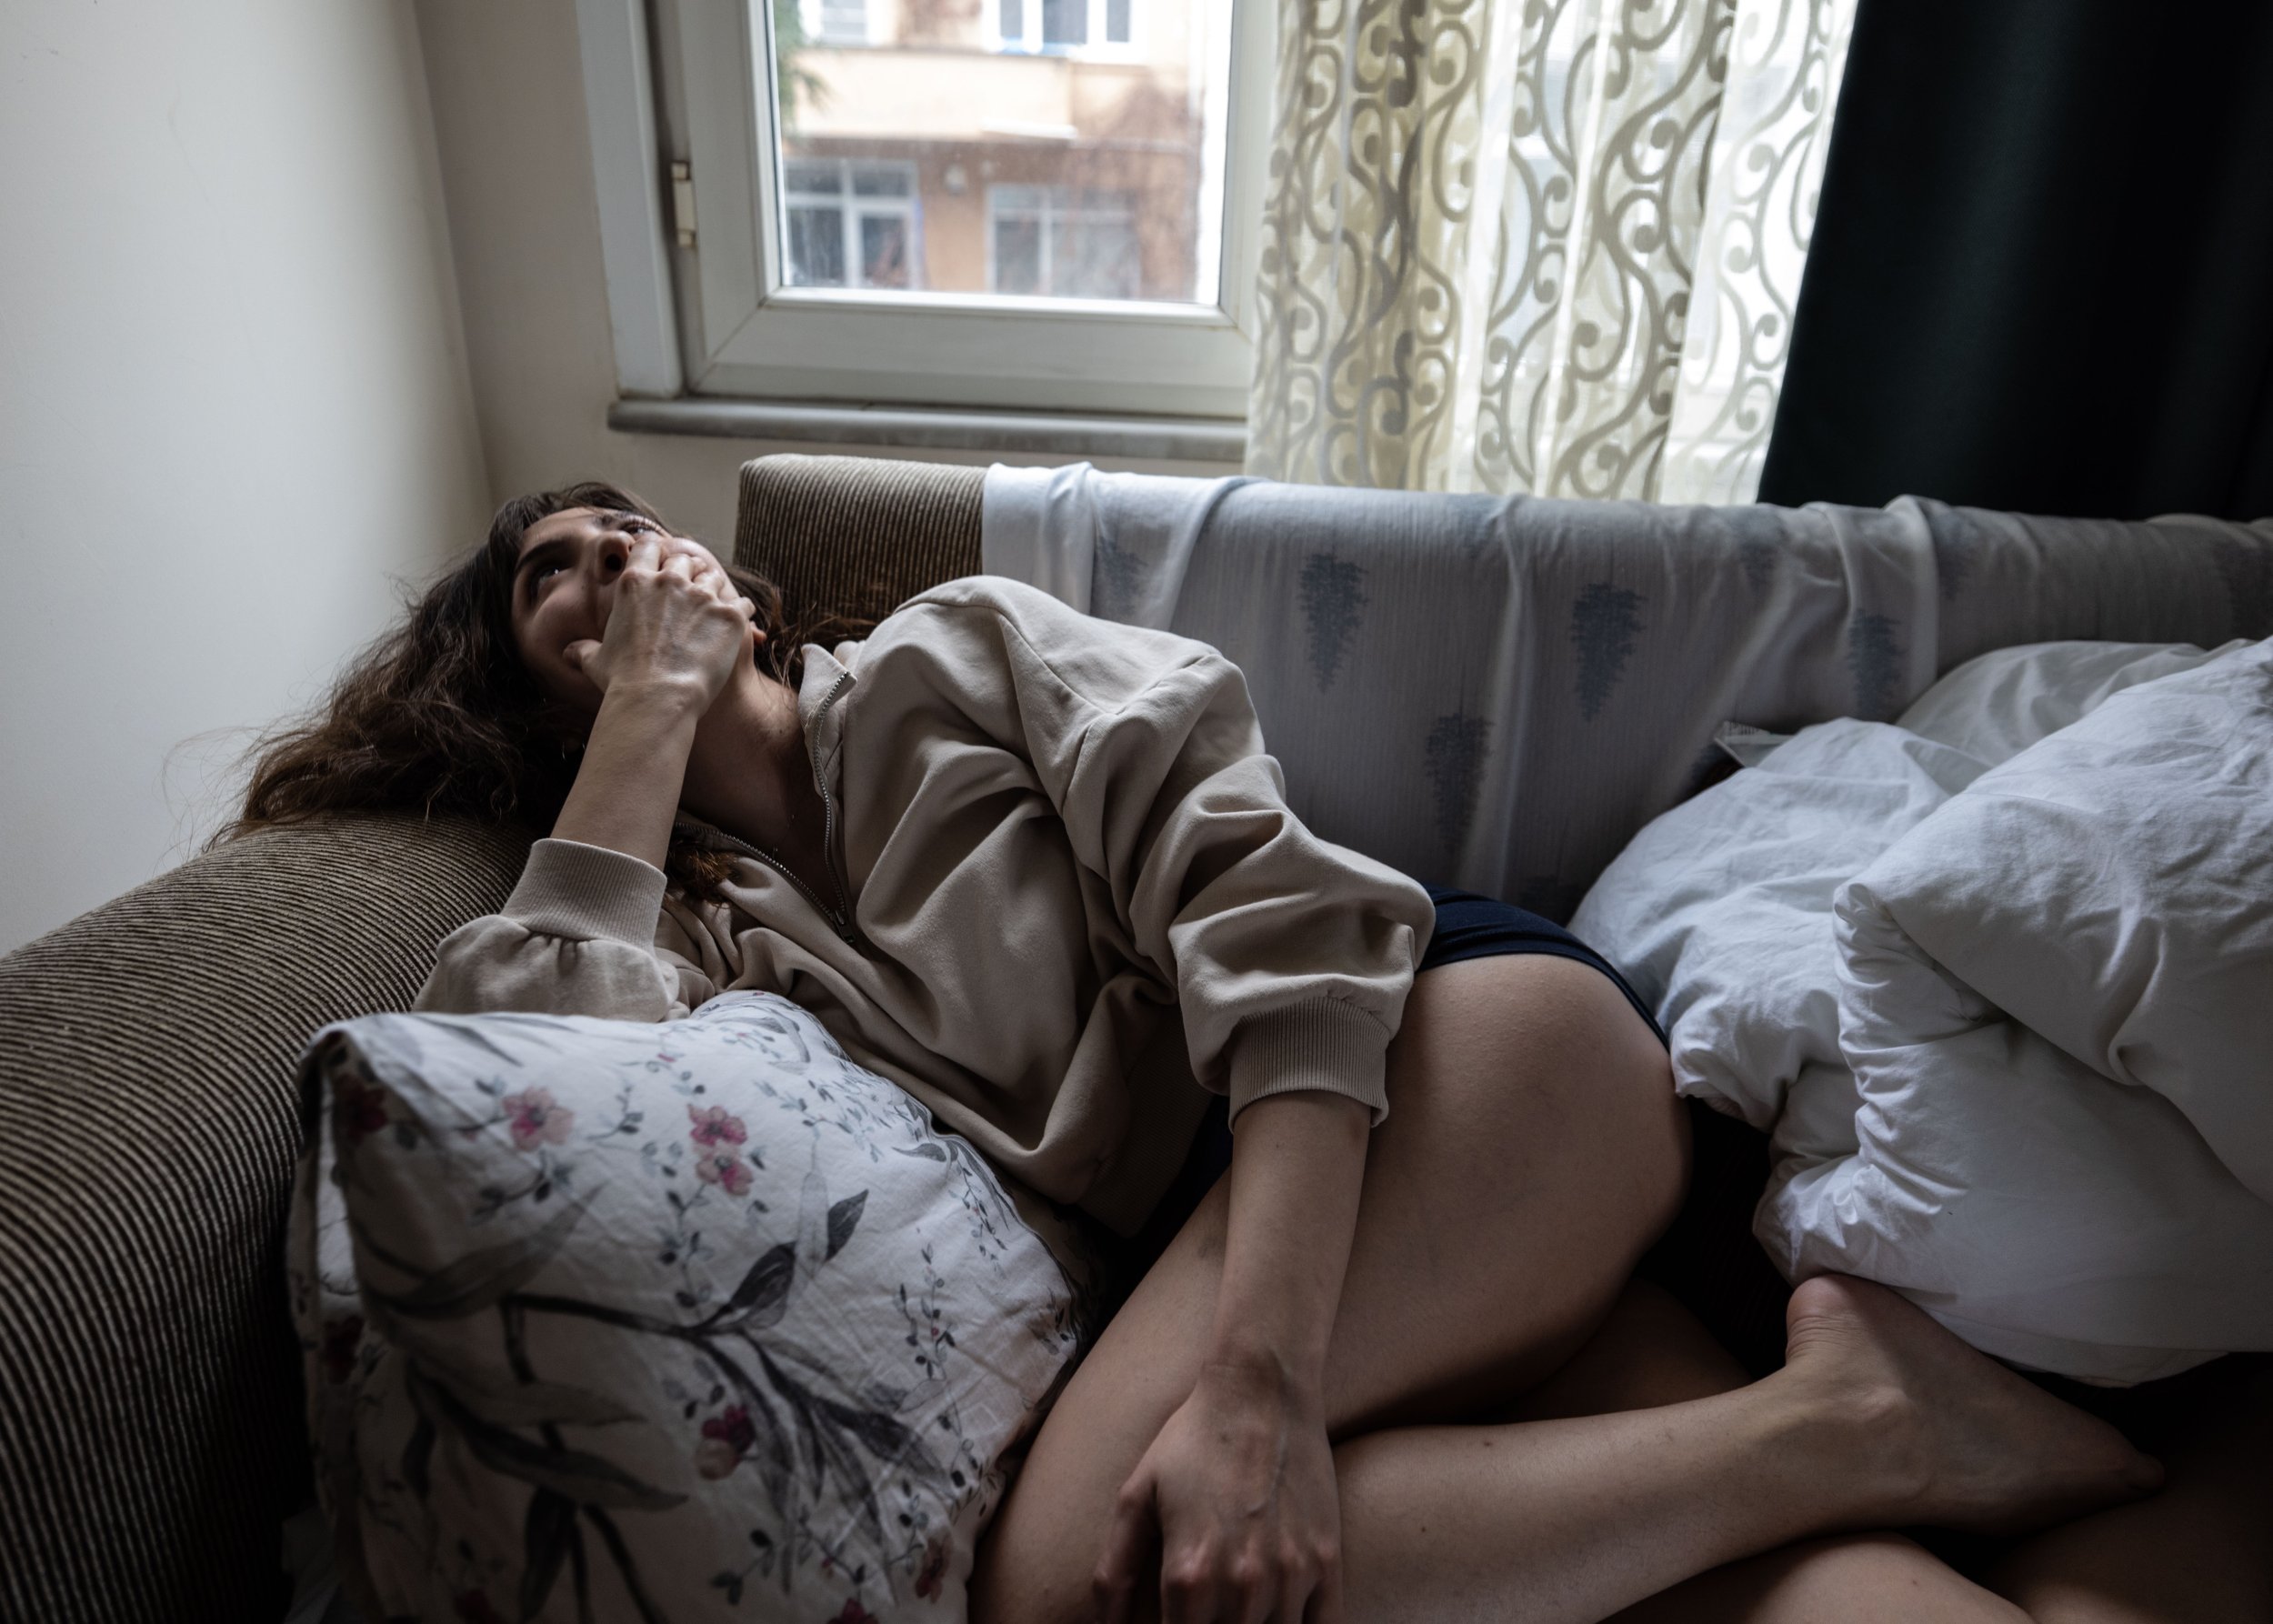  Isik, 27, leans back on the couch in her apartment as she describes the culture around women in Turkey disclosing her own experiences with sexual violence. 